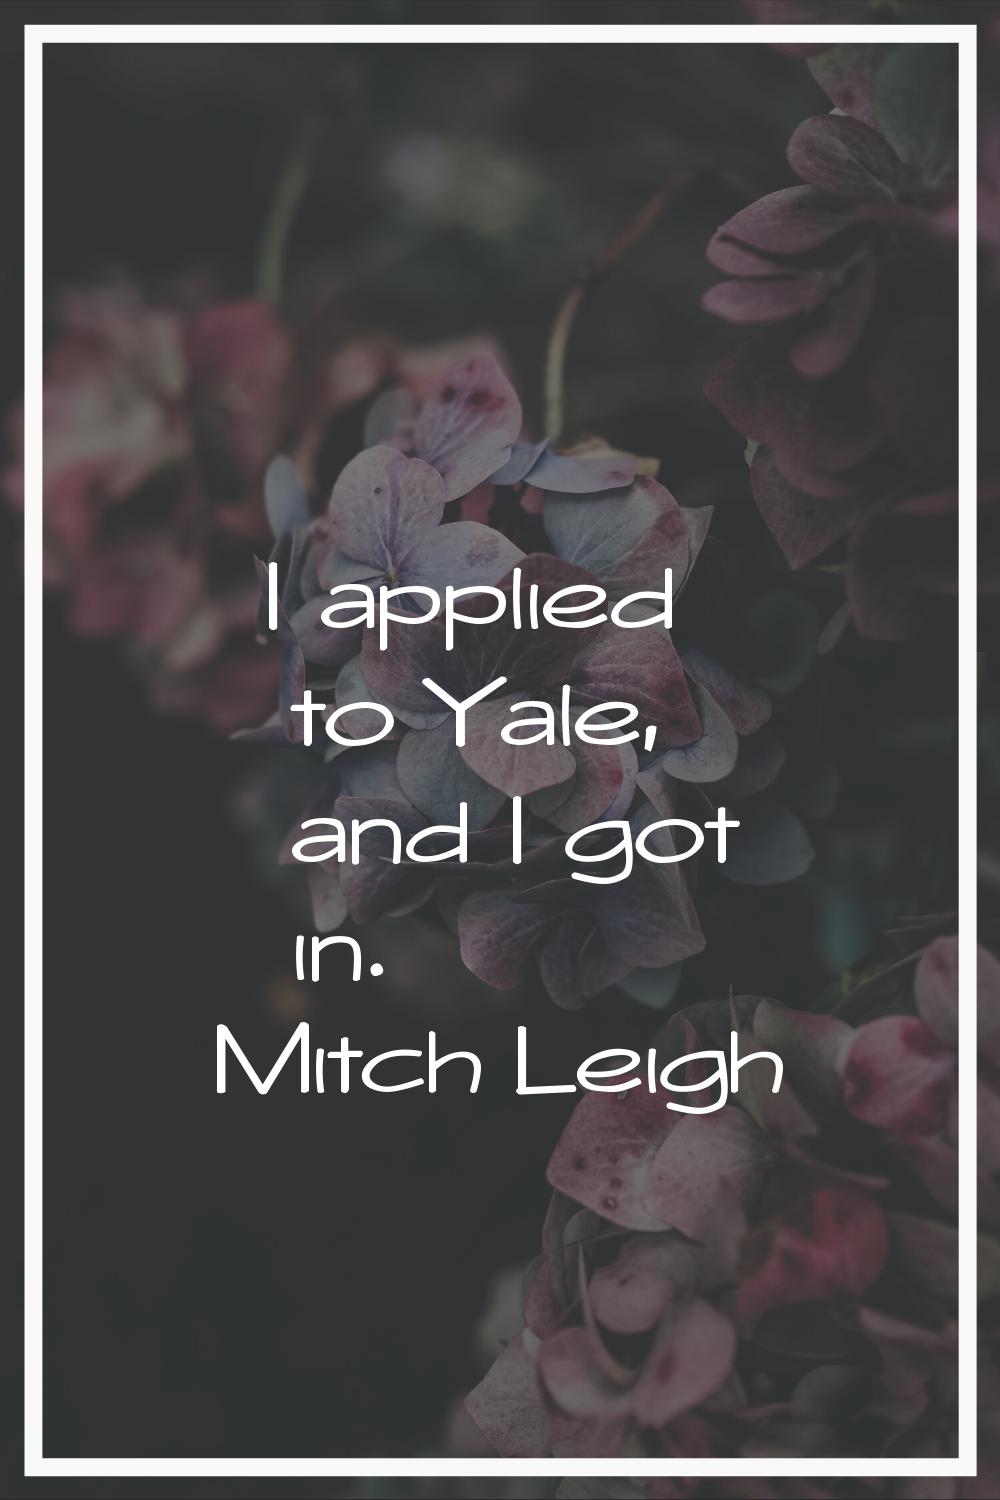 I applied to Yale, and I got in.